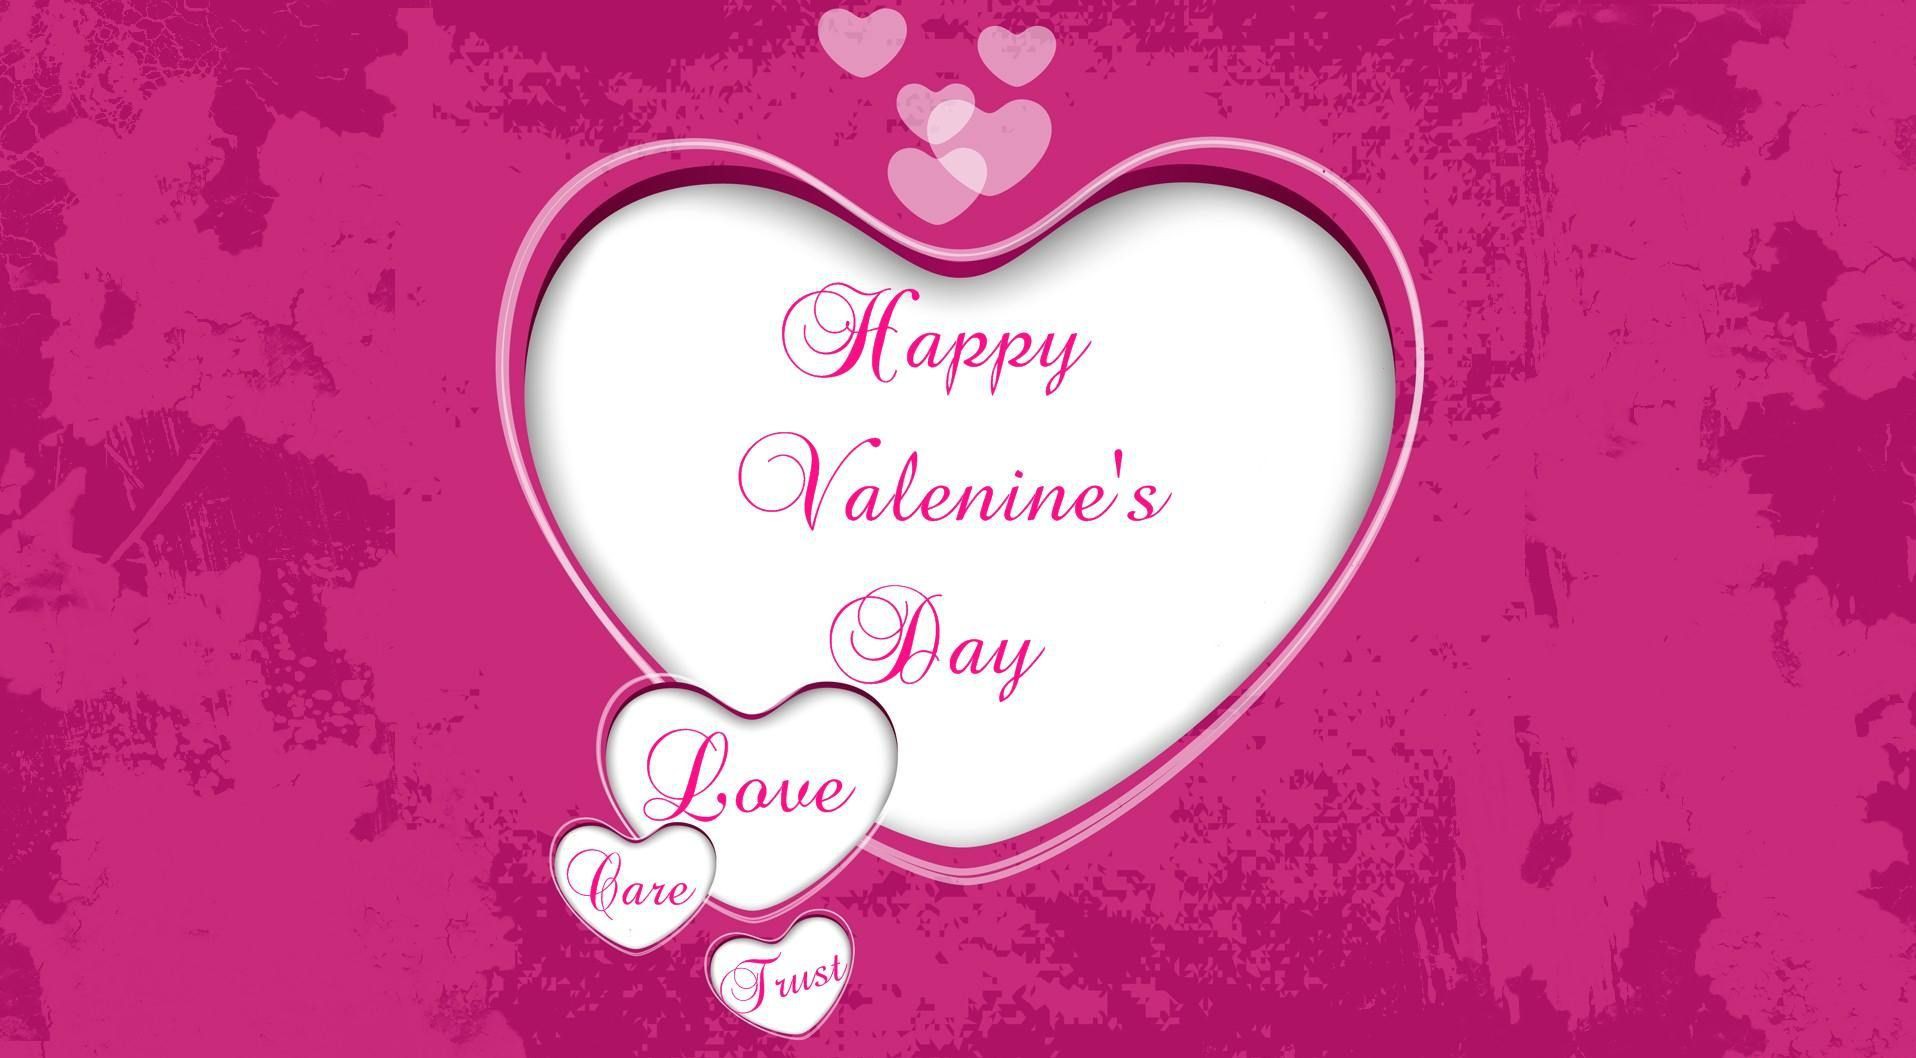 Valentines Day Card Download Hd Picture